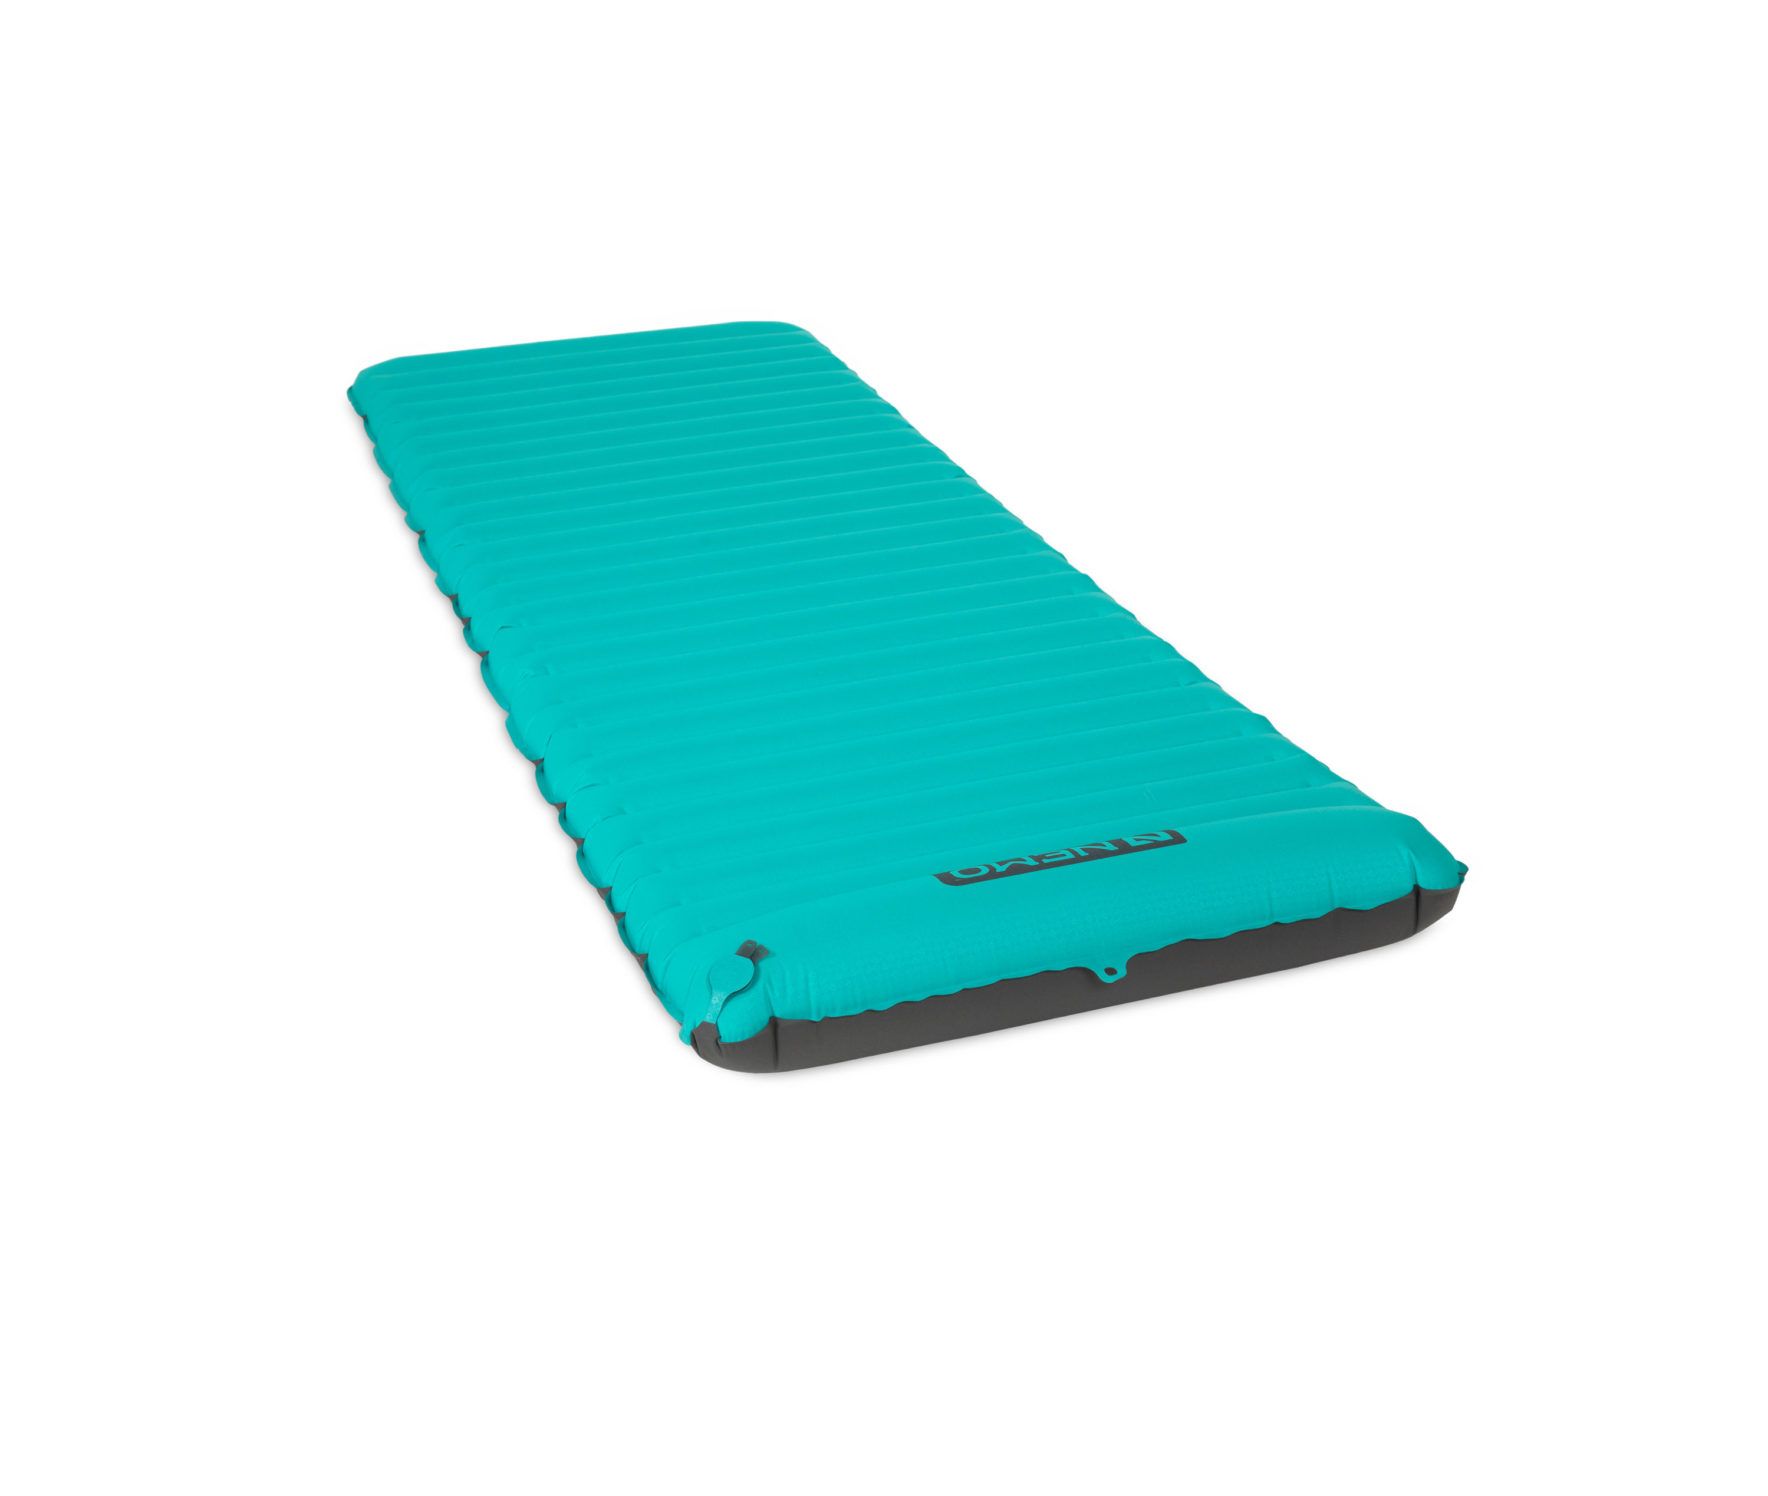 Matelas gonflable Astro Regular 